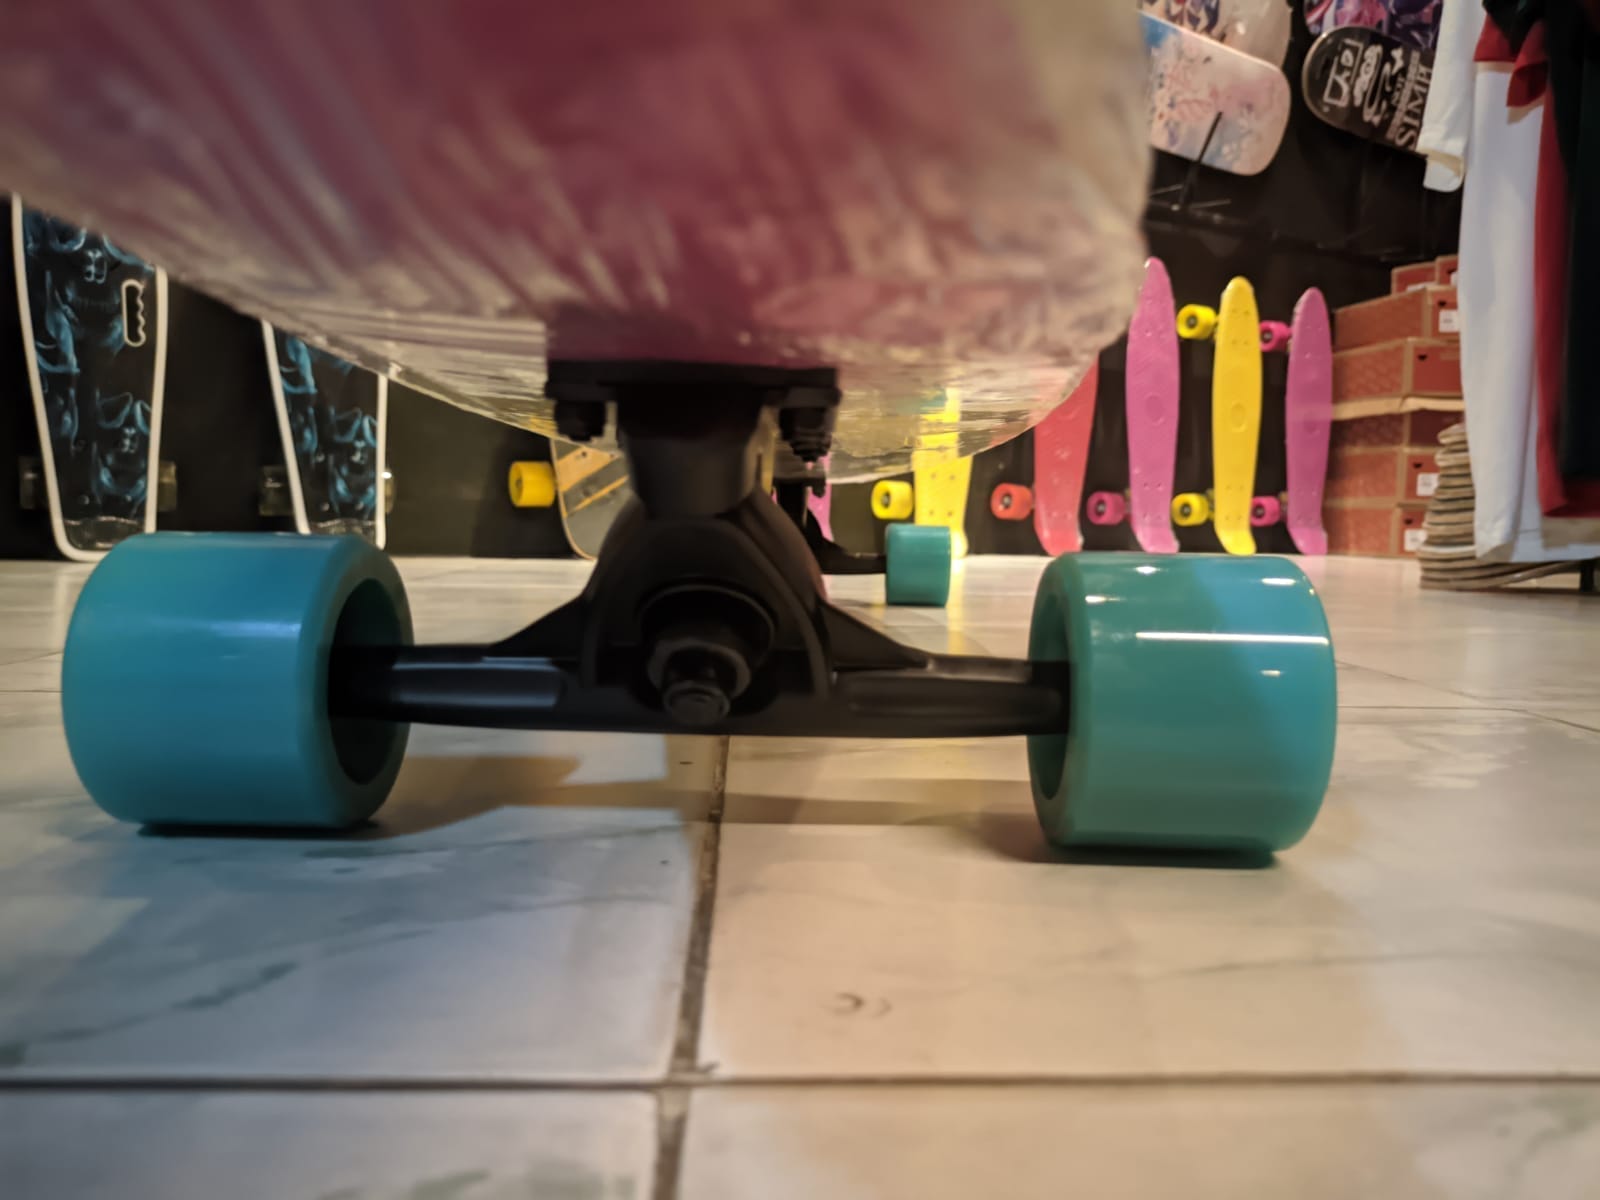 What are the key differences between skateboard VS scooter?